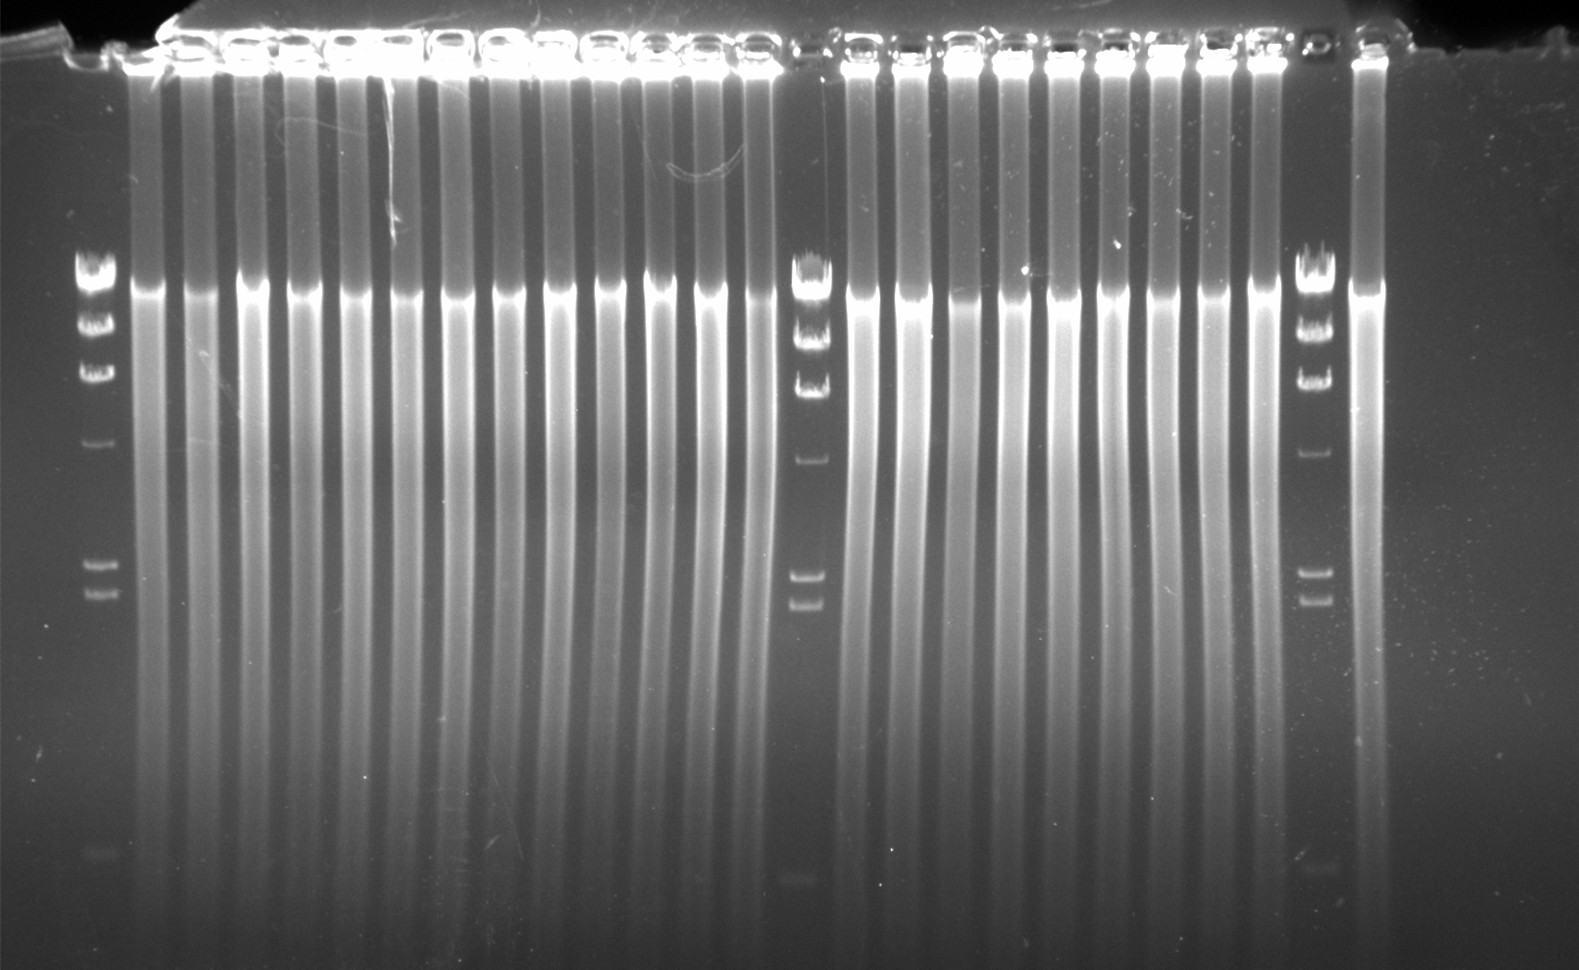 Electrophoresis of the amplified products from microdissected microchromosome (Image by IHB)